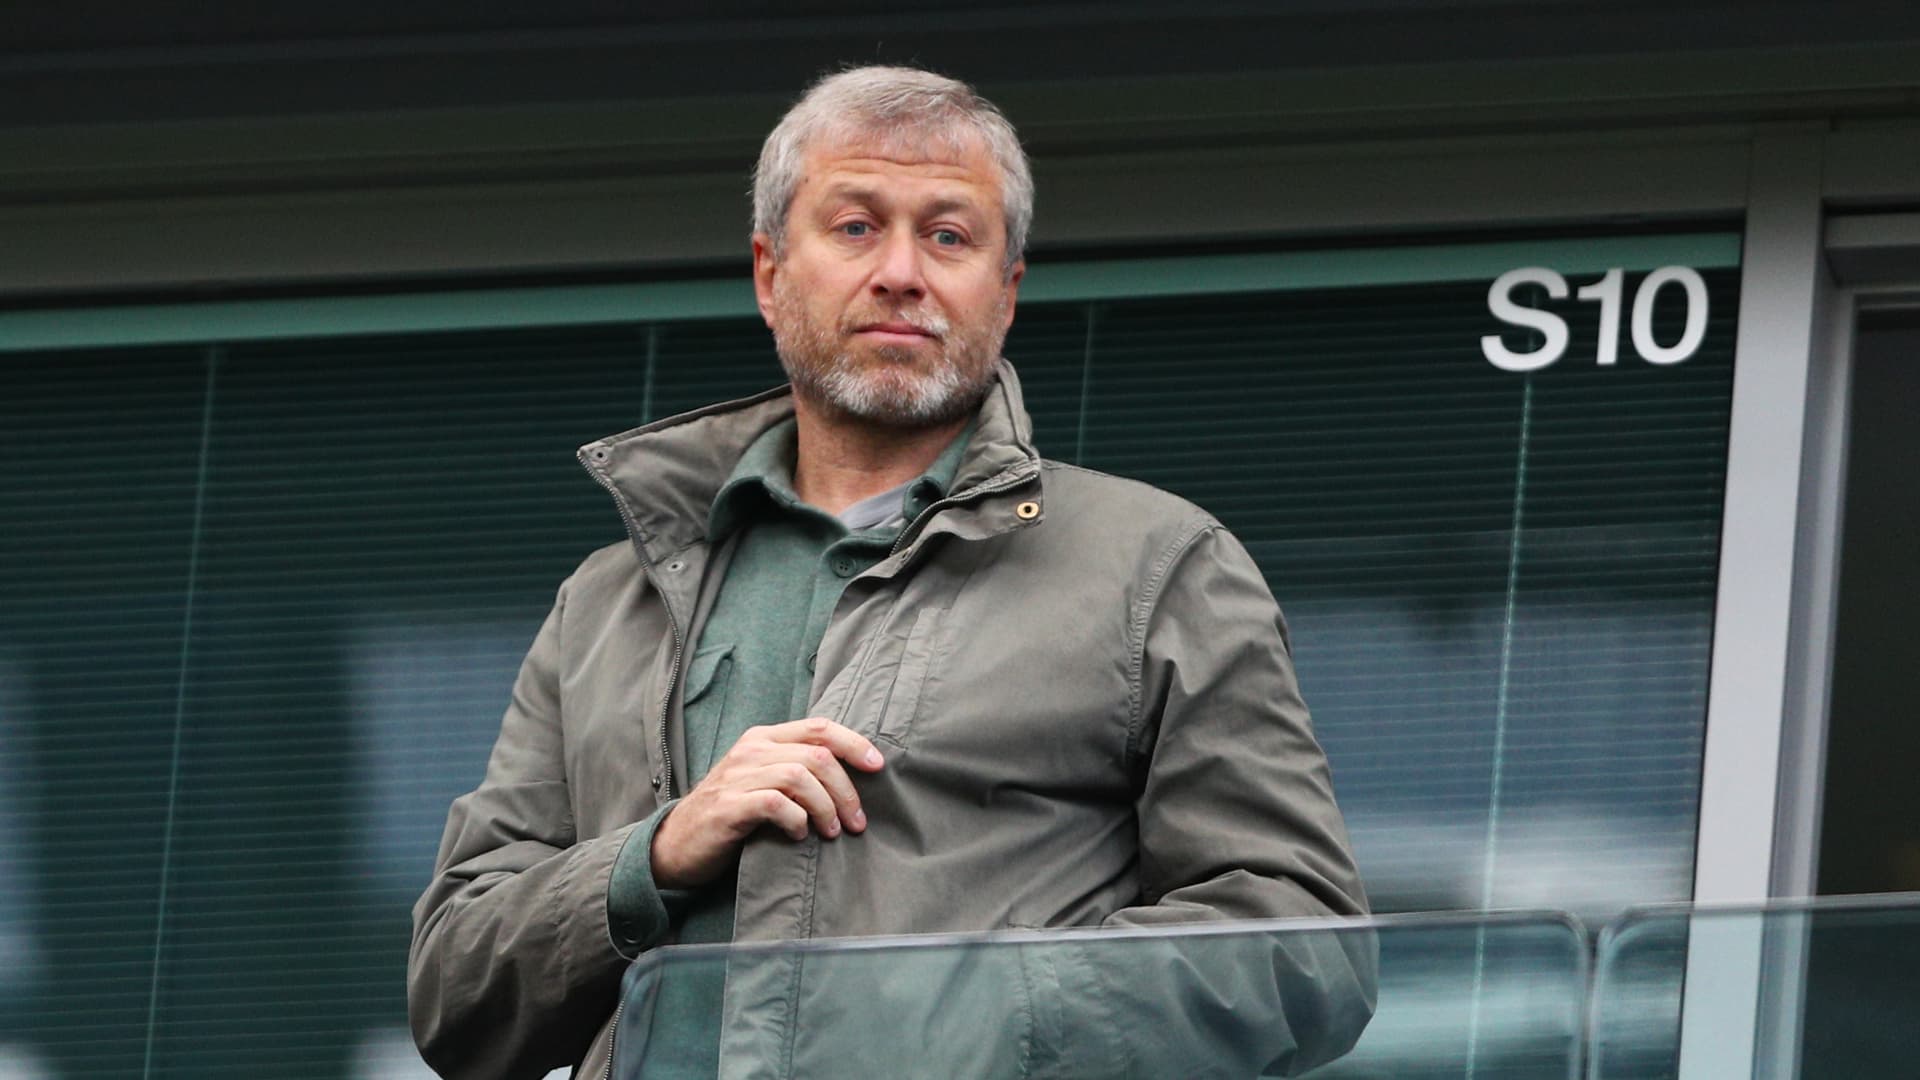 Chelsea owner Roman Abramovich looks on from the stands during the Barclays Premier League match between Chelsea and Manchester City at Stamford Bridge on April 16, 2016 in London, England.